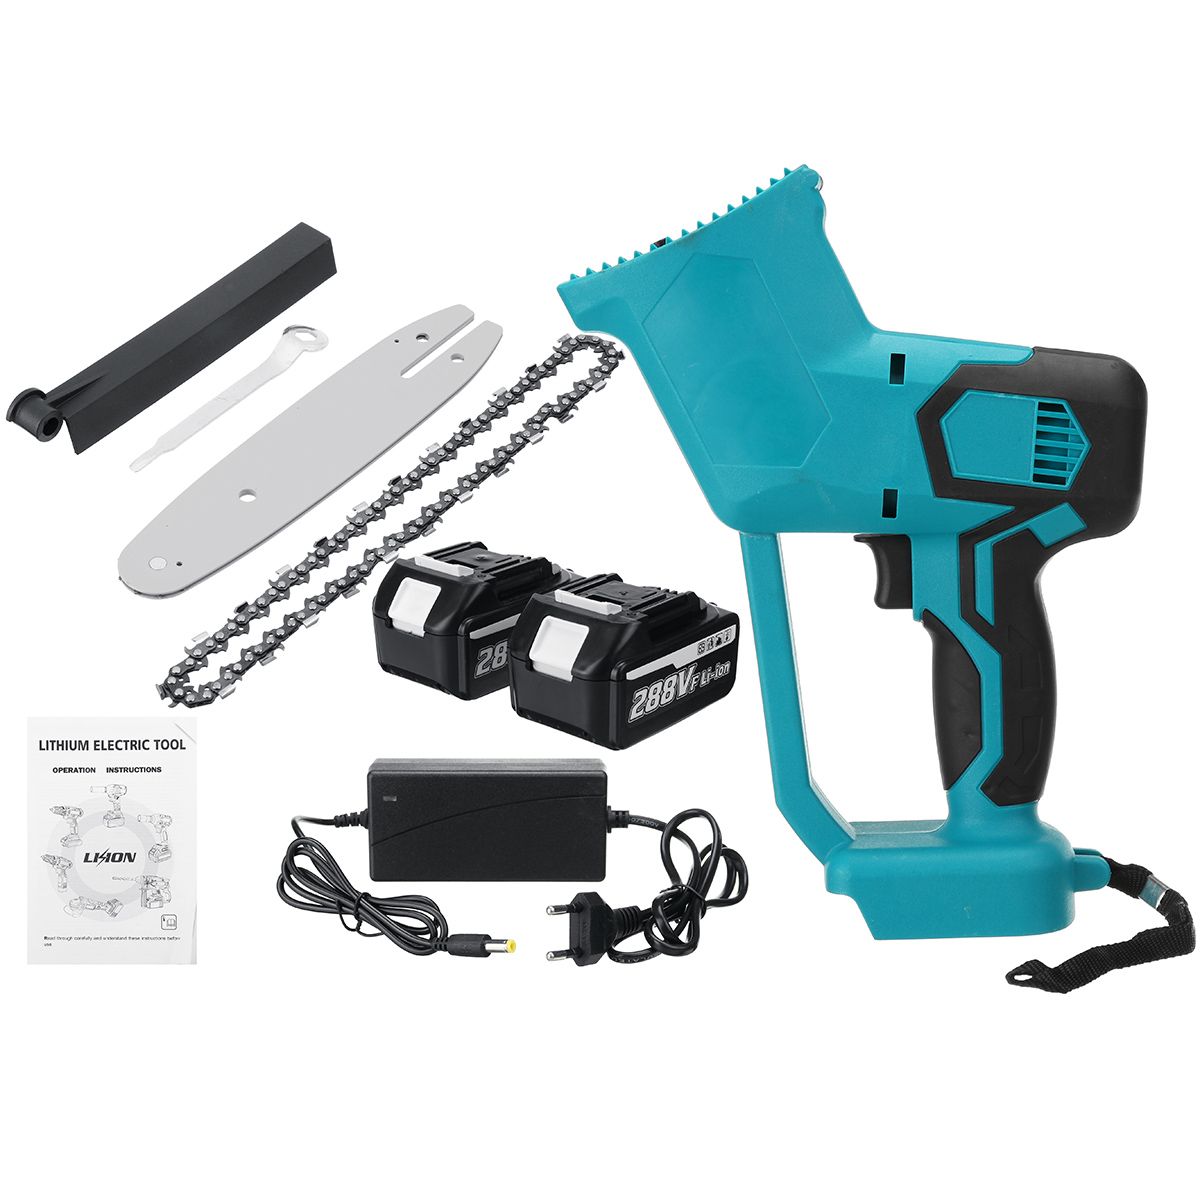 Electric-Cordless-One-Hand-Saw-Chain-Saw-Woodworking-with-Battery-Kit-1764520